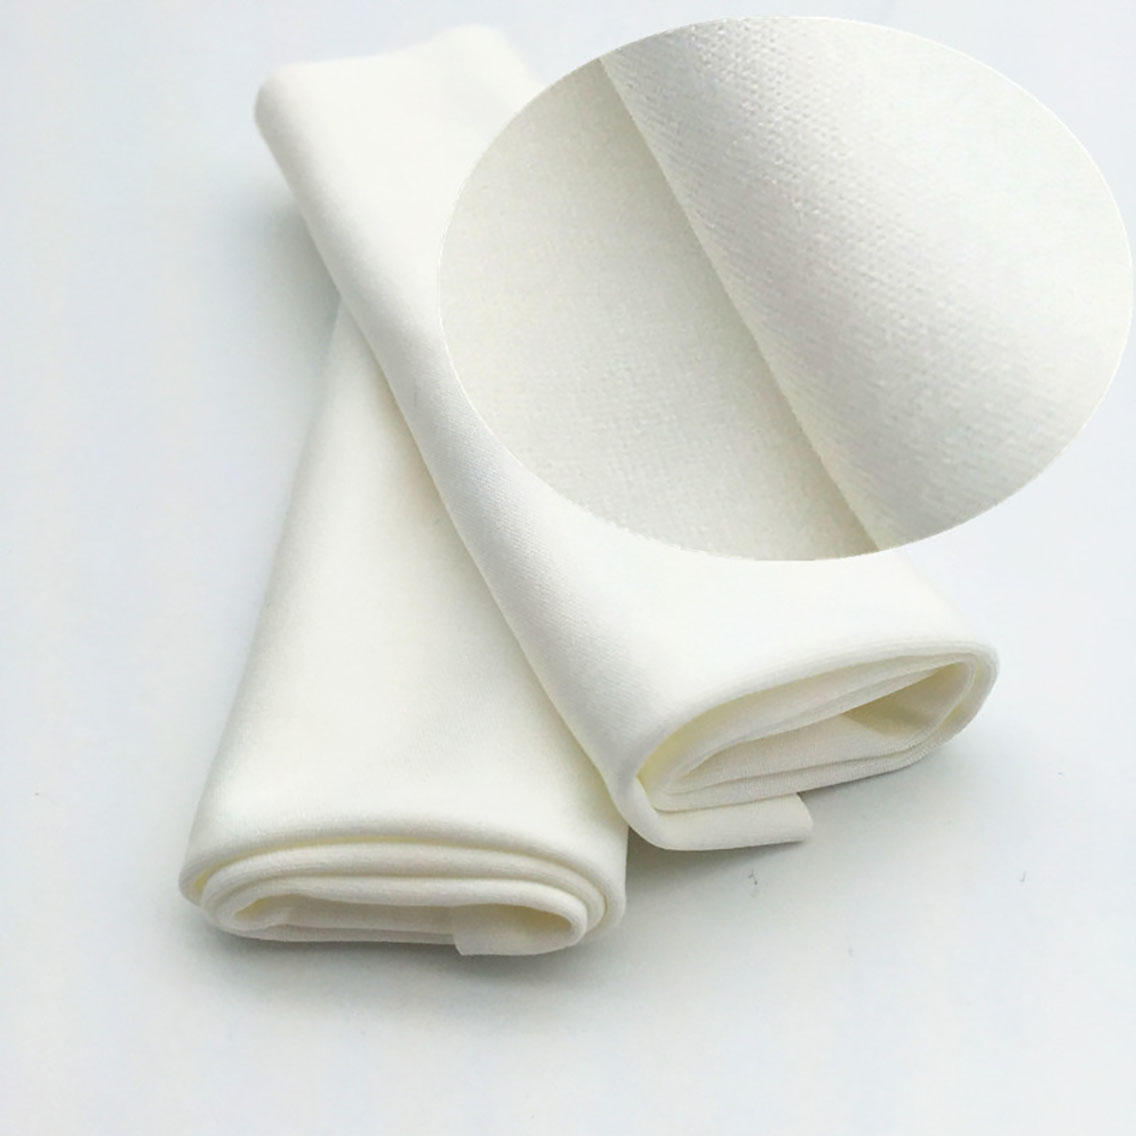 Cleanmo 30% nylon lens cloth supplier for chamber cleaning